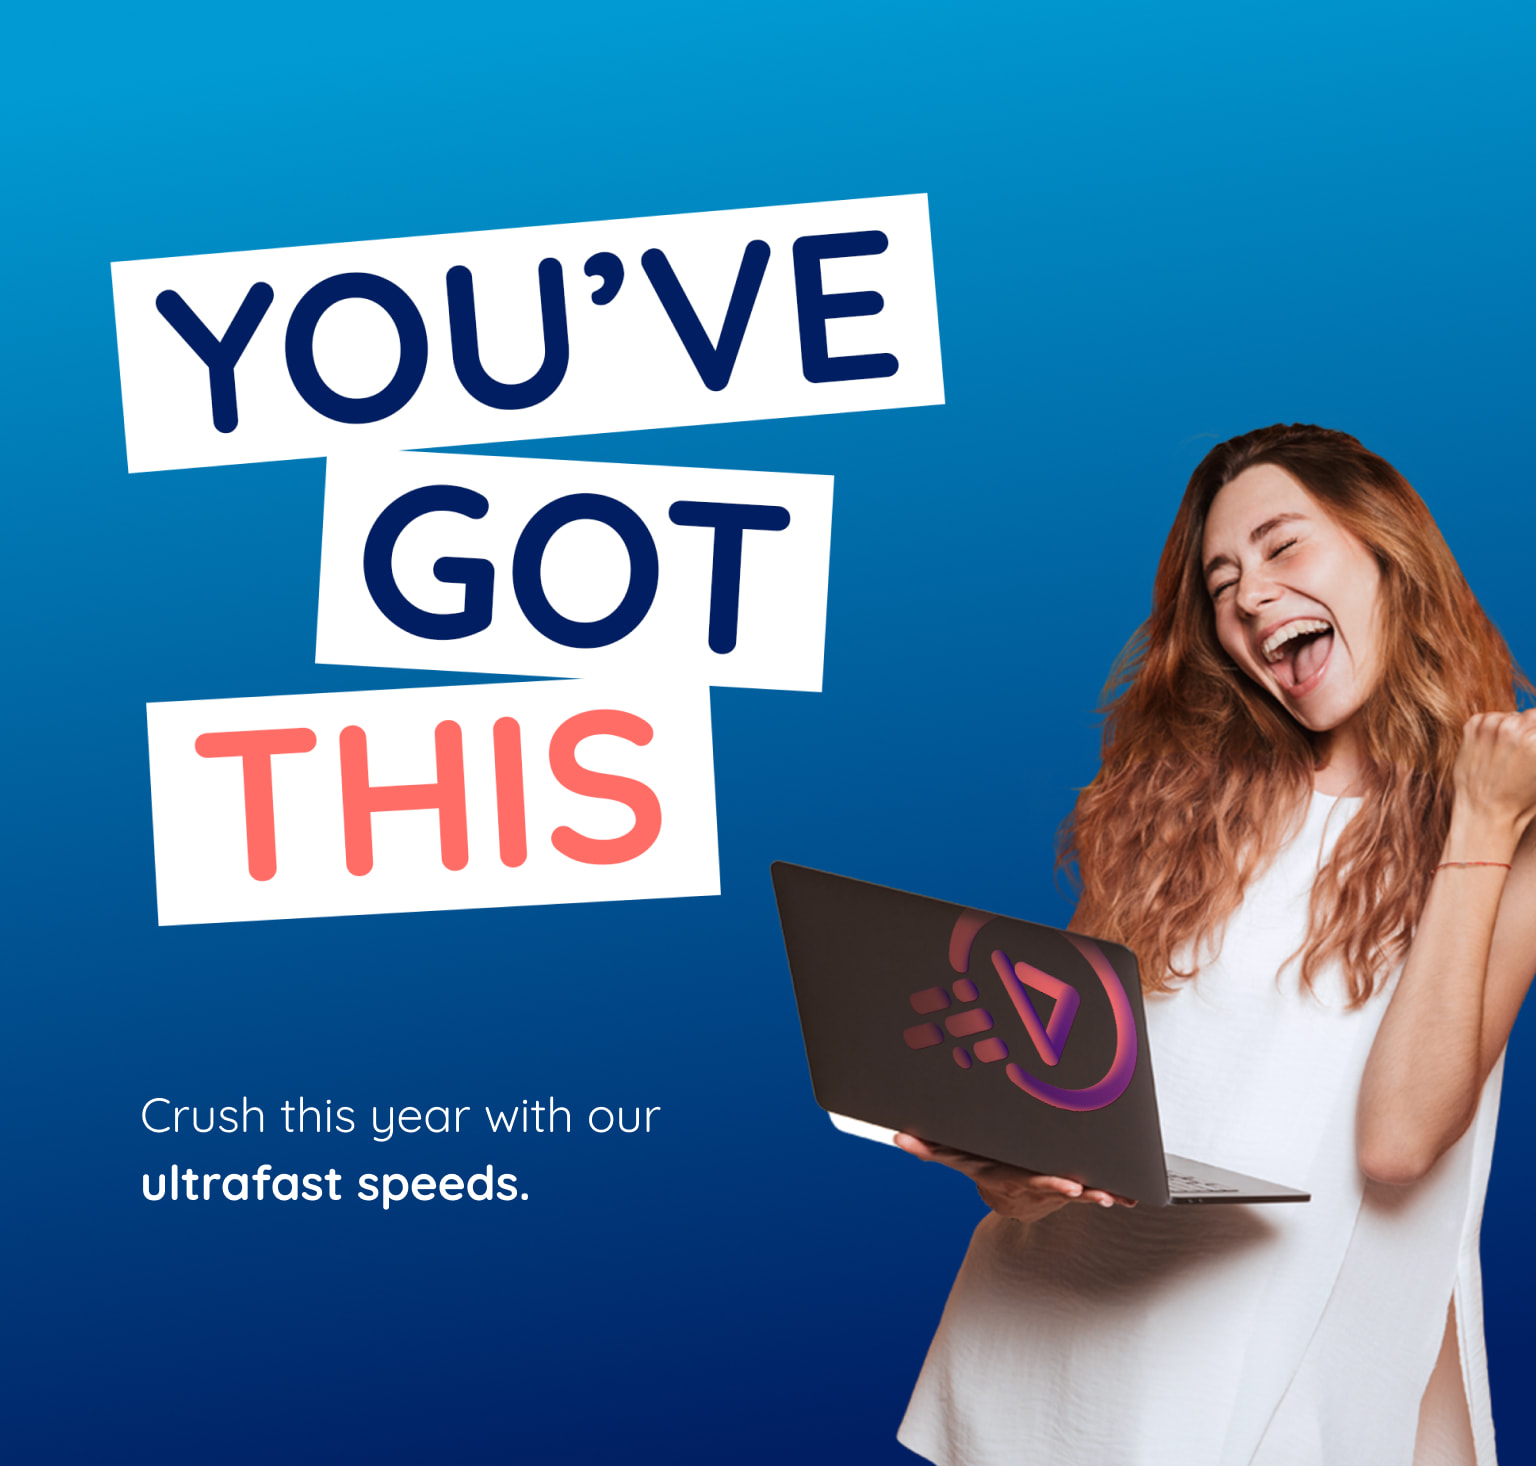 You’ve got this Crush this year with our ultrafast speeds.